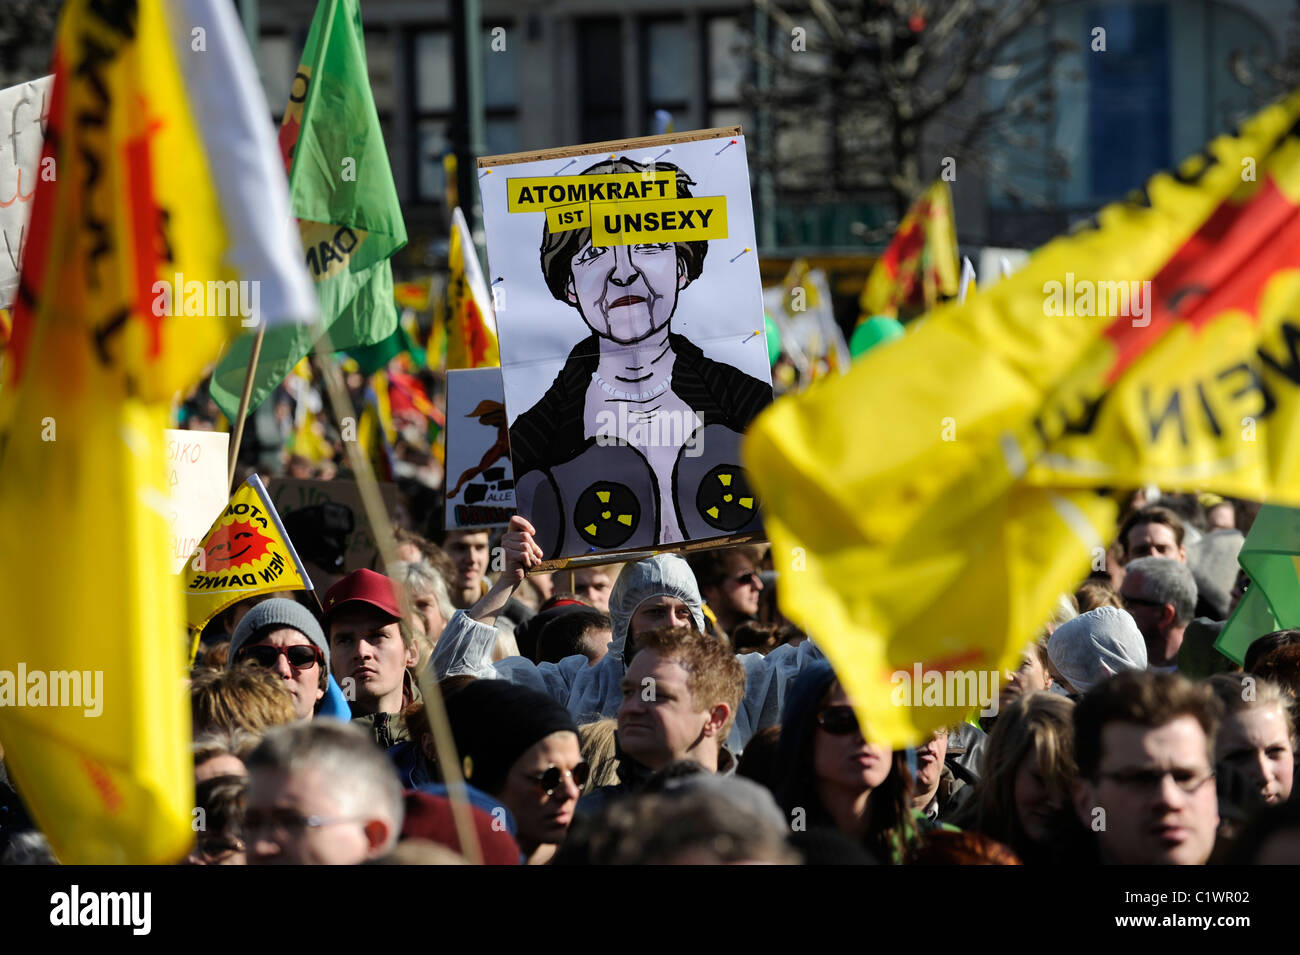 GERMANY Hamburg, large rally and public meeting at townhall market against nuclear power after accident Fukushima, image of chancellor Angela Merkel Stock Photo